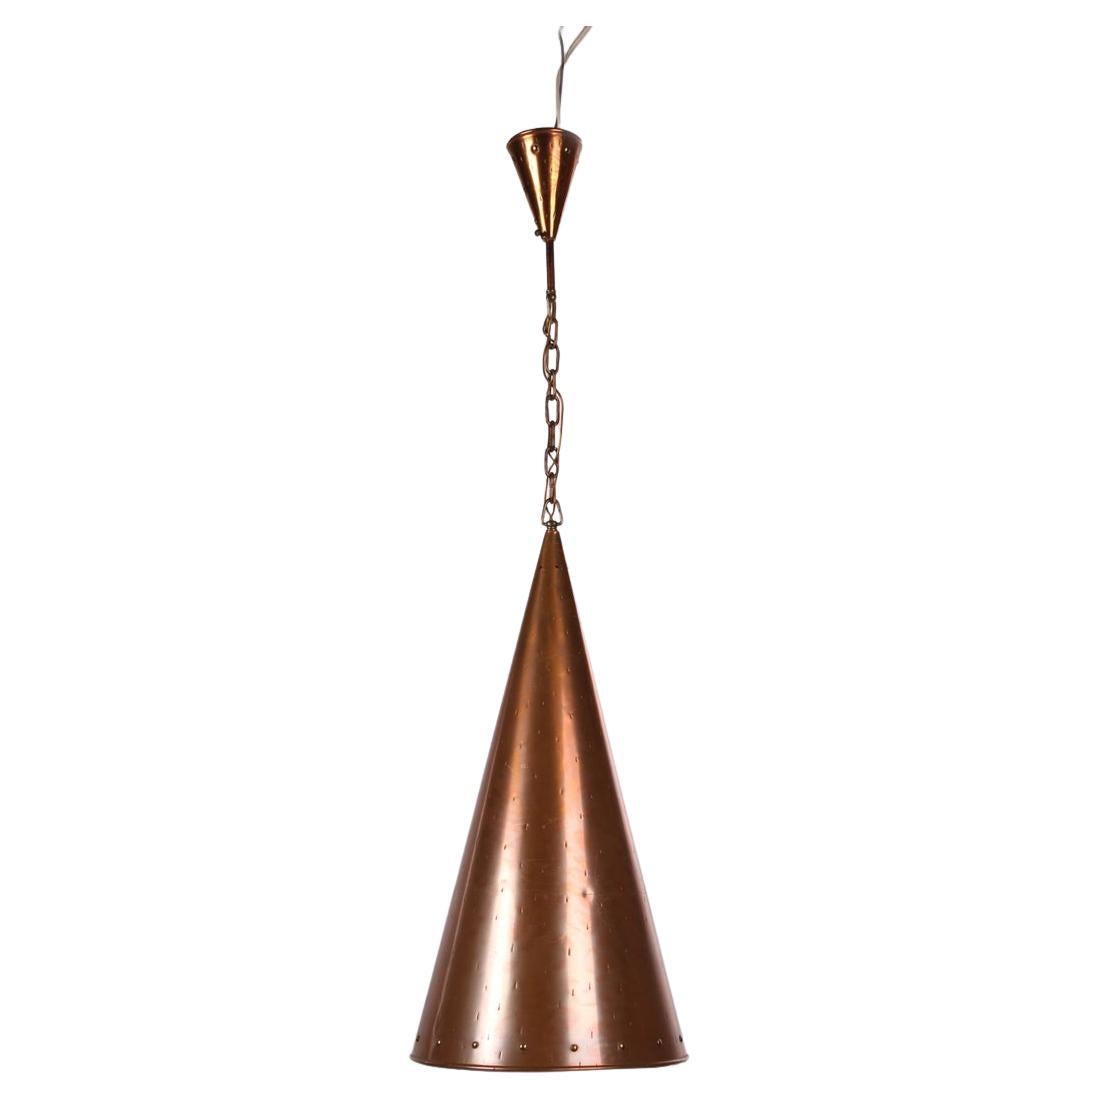 Danish Hand Hammered Copper Pendant Lamp from E.S Horn Aalestrup, 50s For Sale